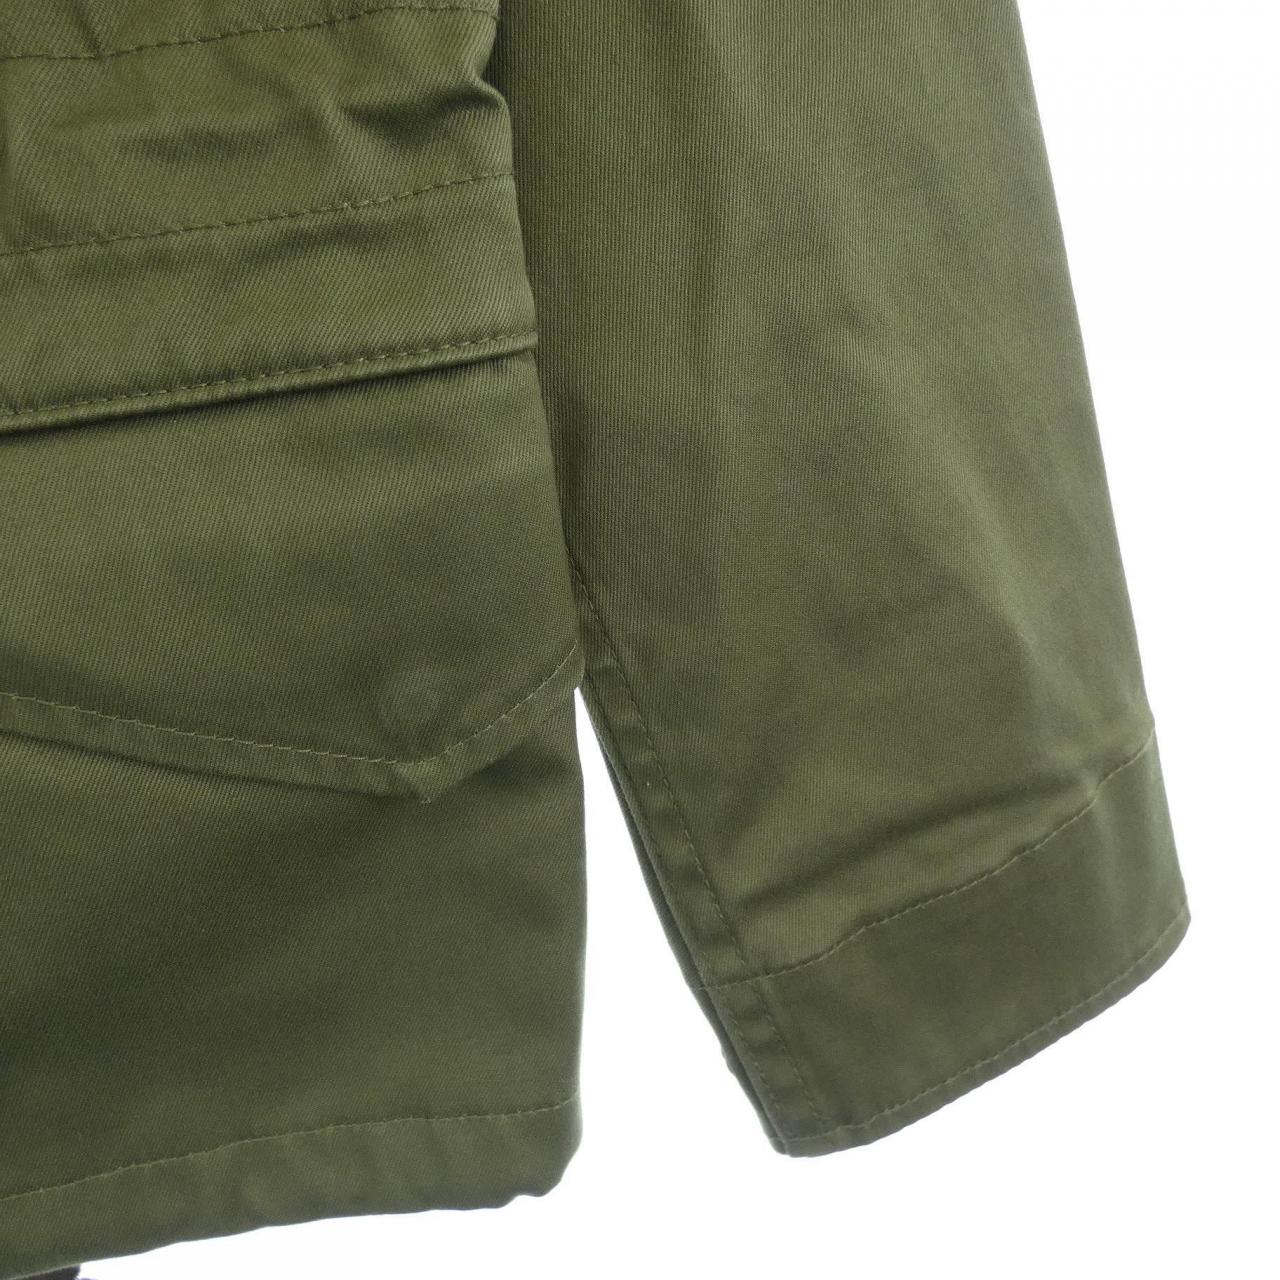 UPPER HIGHTS military jacket